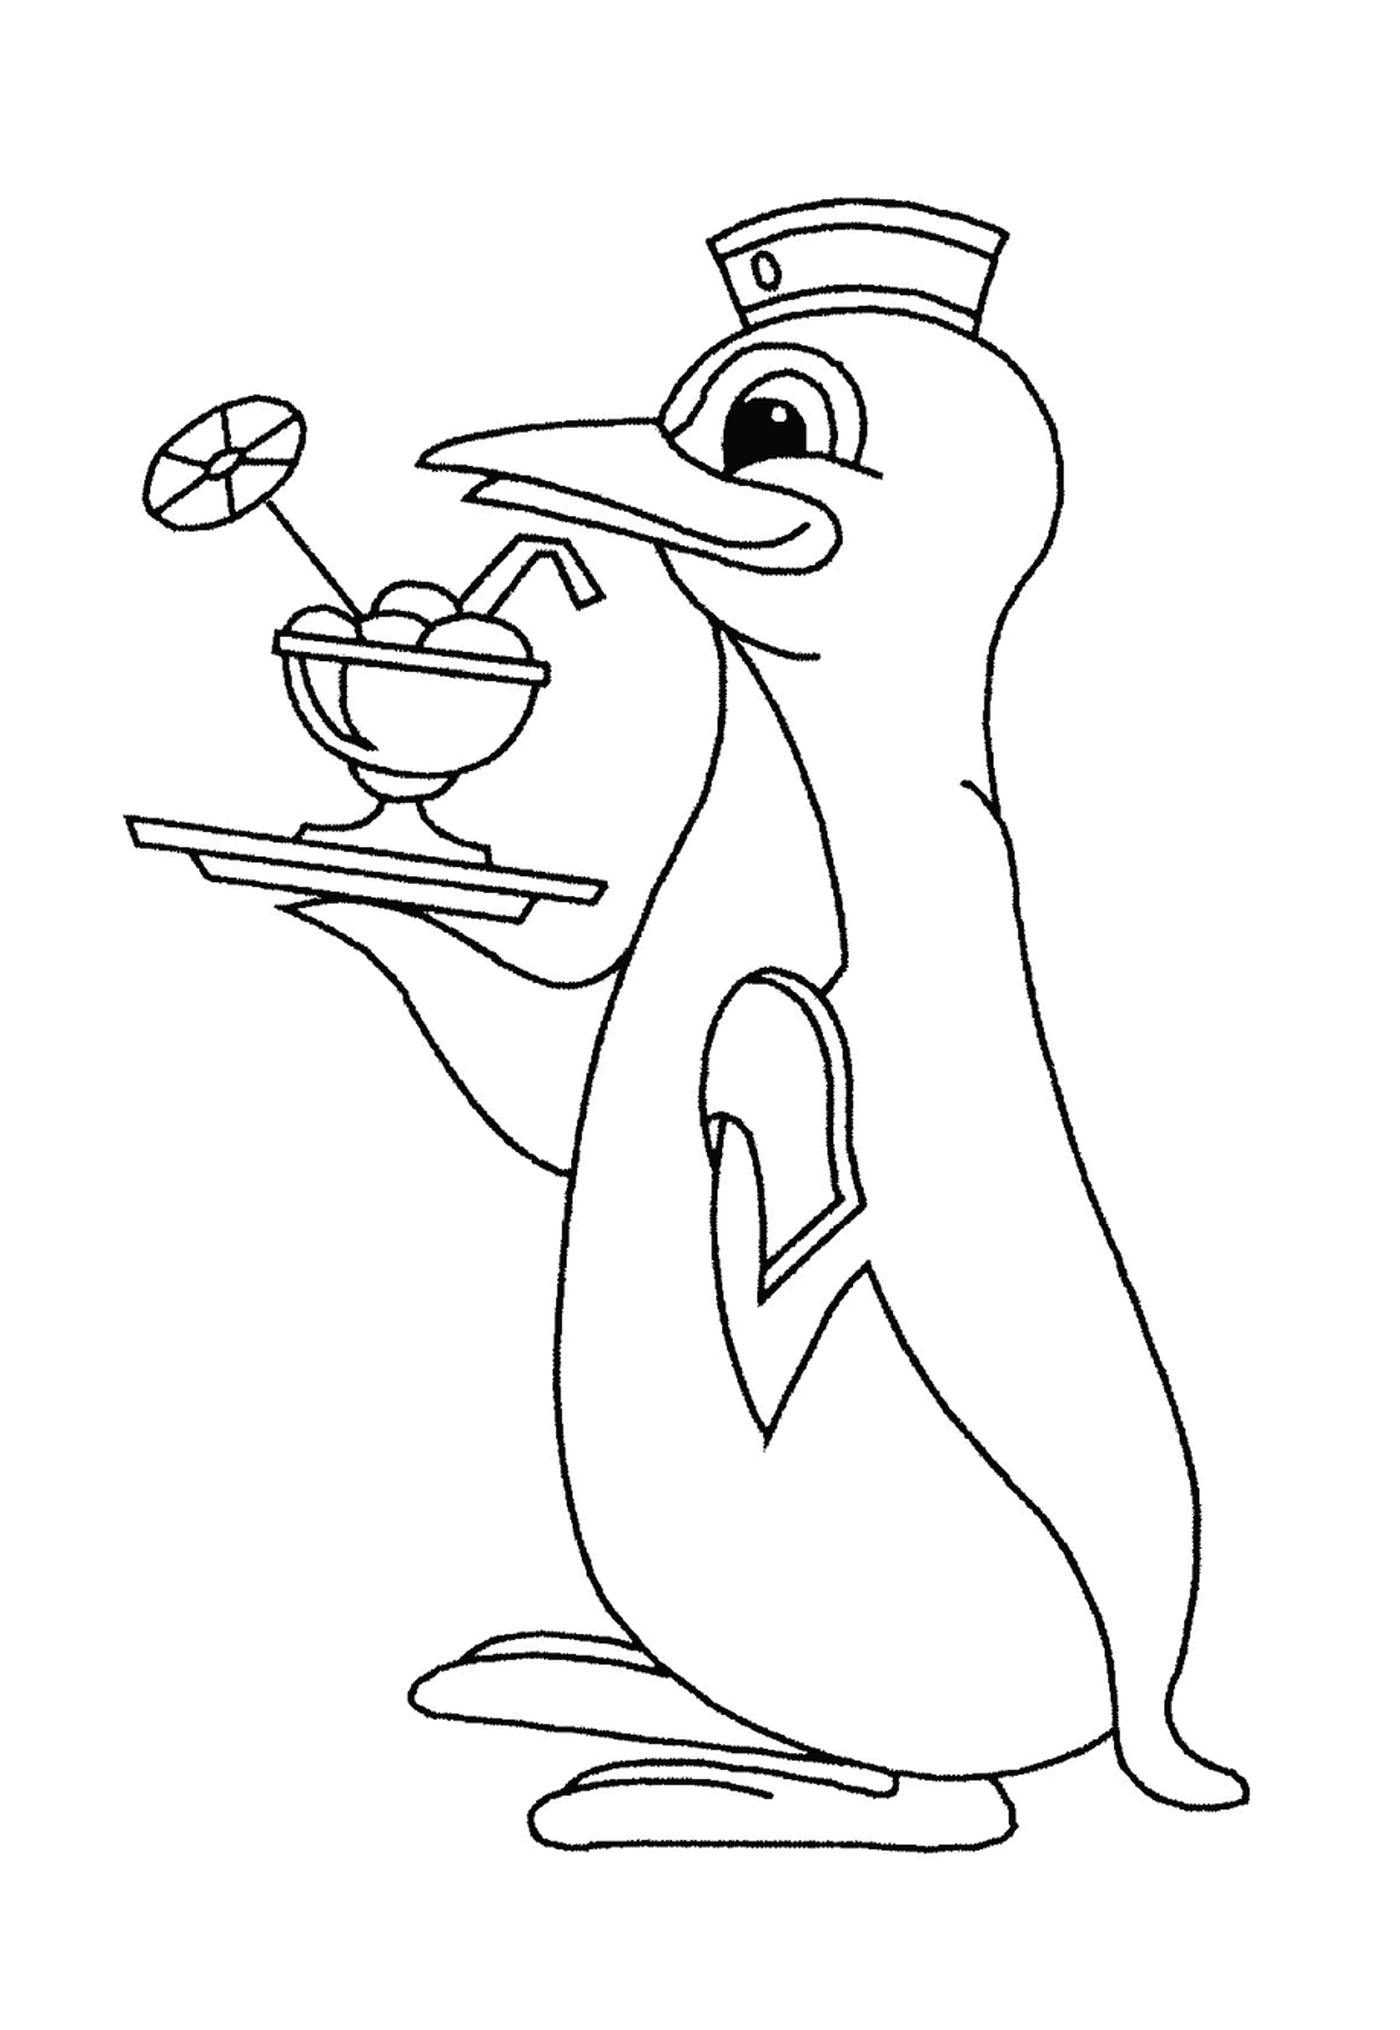  Penguin waiter with a drink 